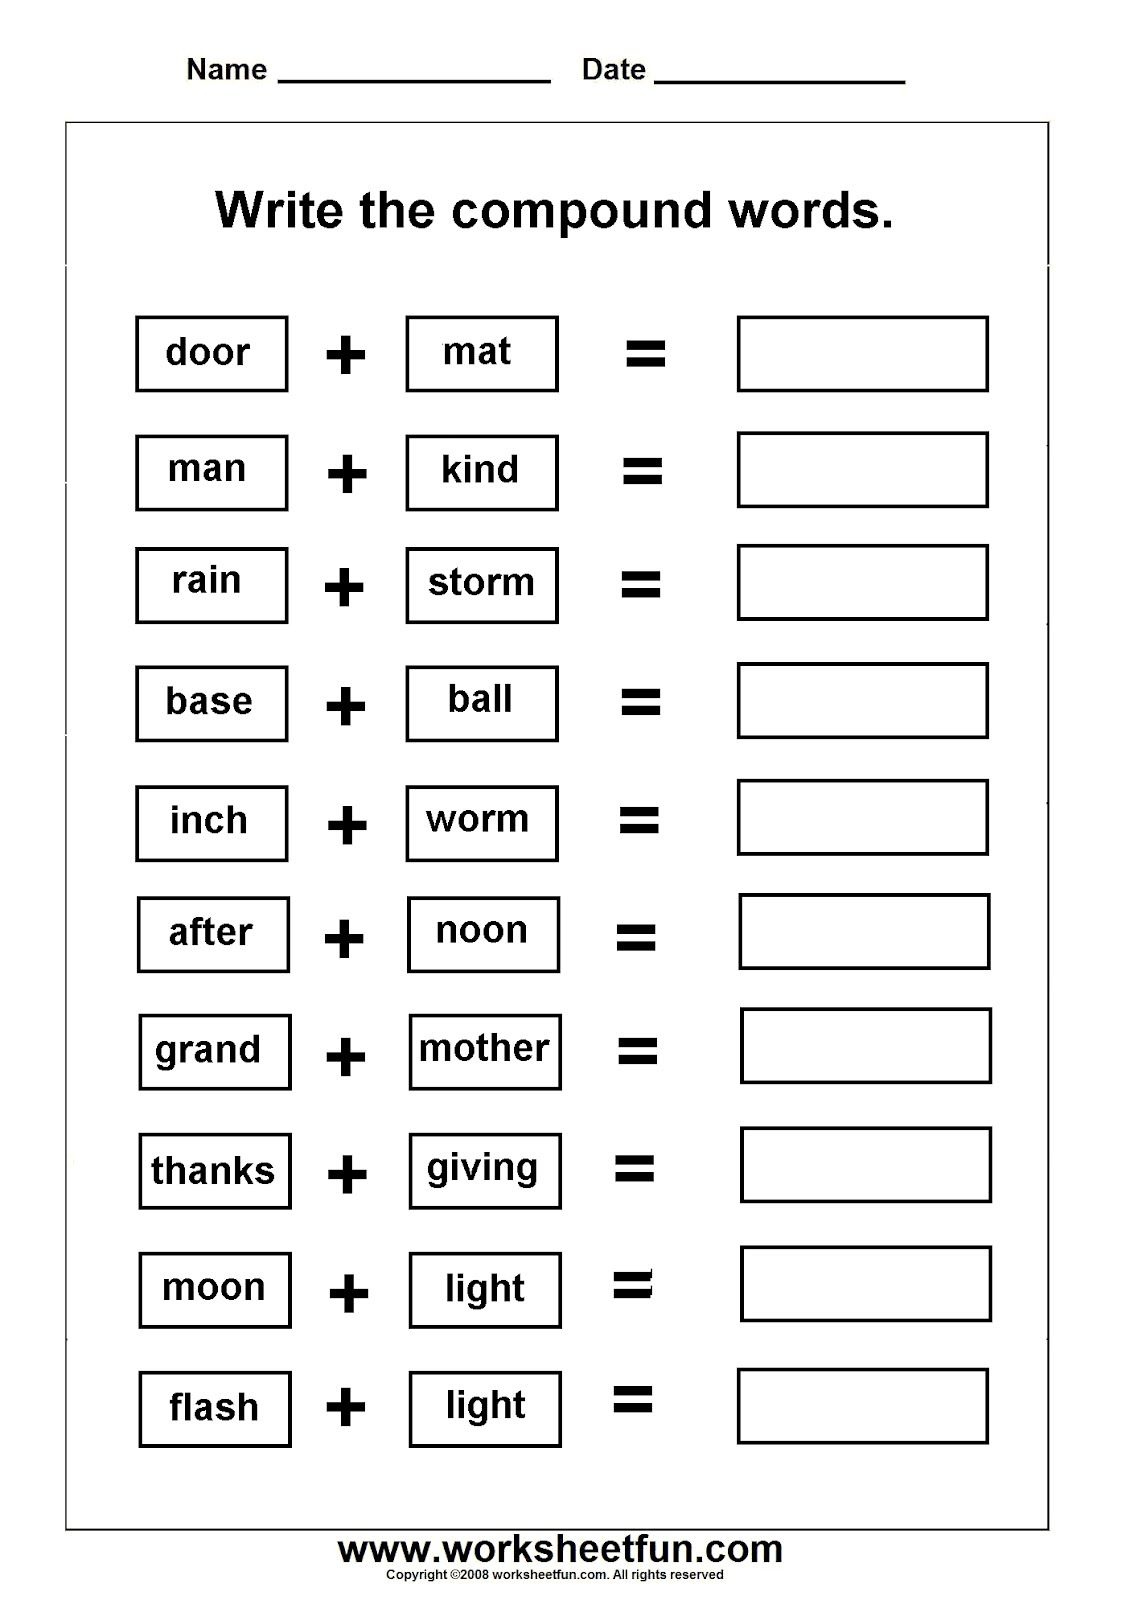 Worksheets On Compound Words With Pictures Compound Words Worksheets 